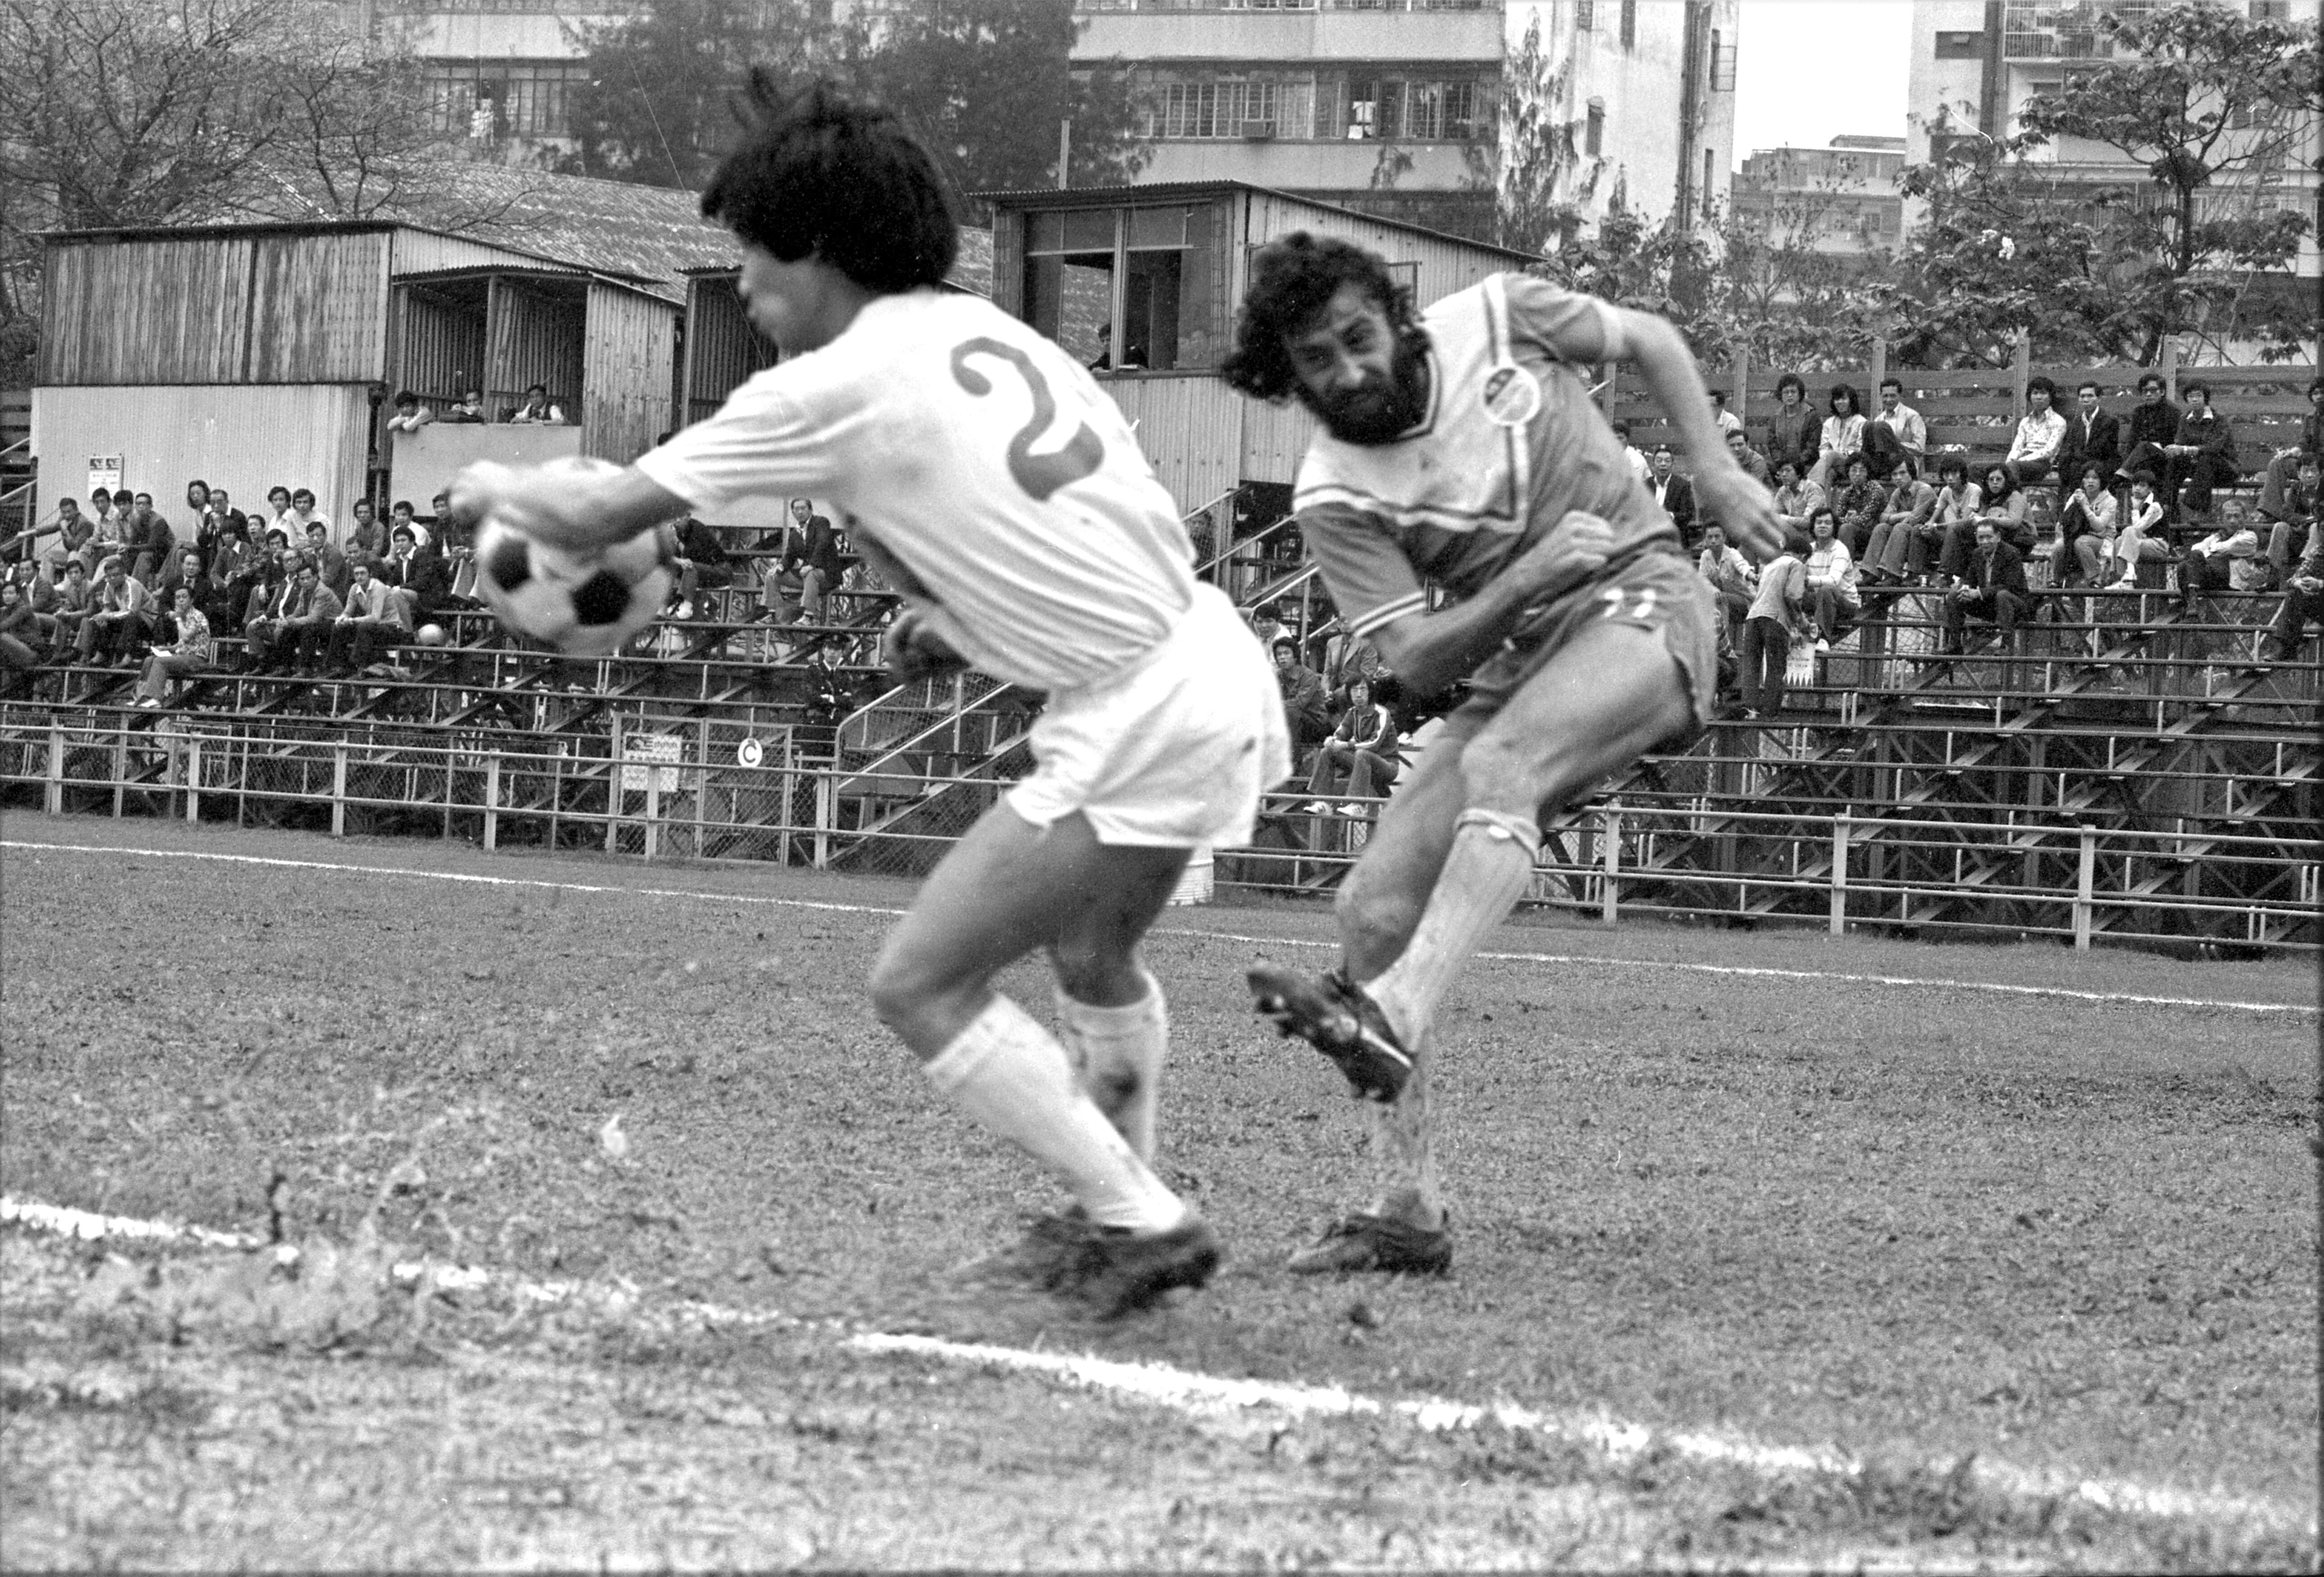 Seiko's Derek Currie (right) takes a shot but is blocked by Western Youth’s Cheung Chi-ming in a game played in April 1978. Photo: SCMP